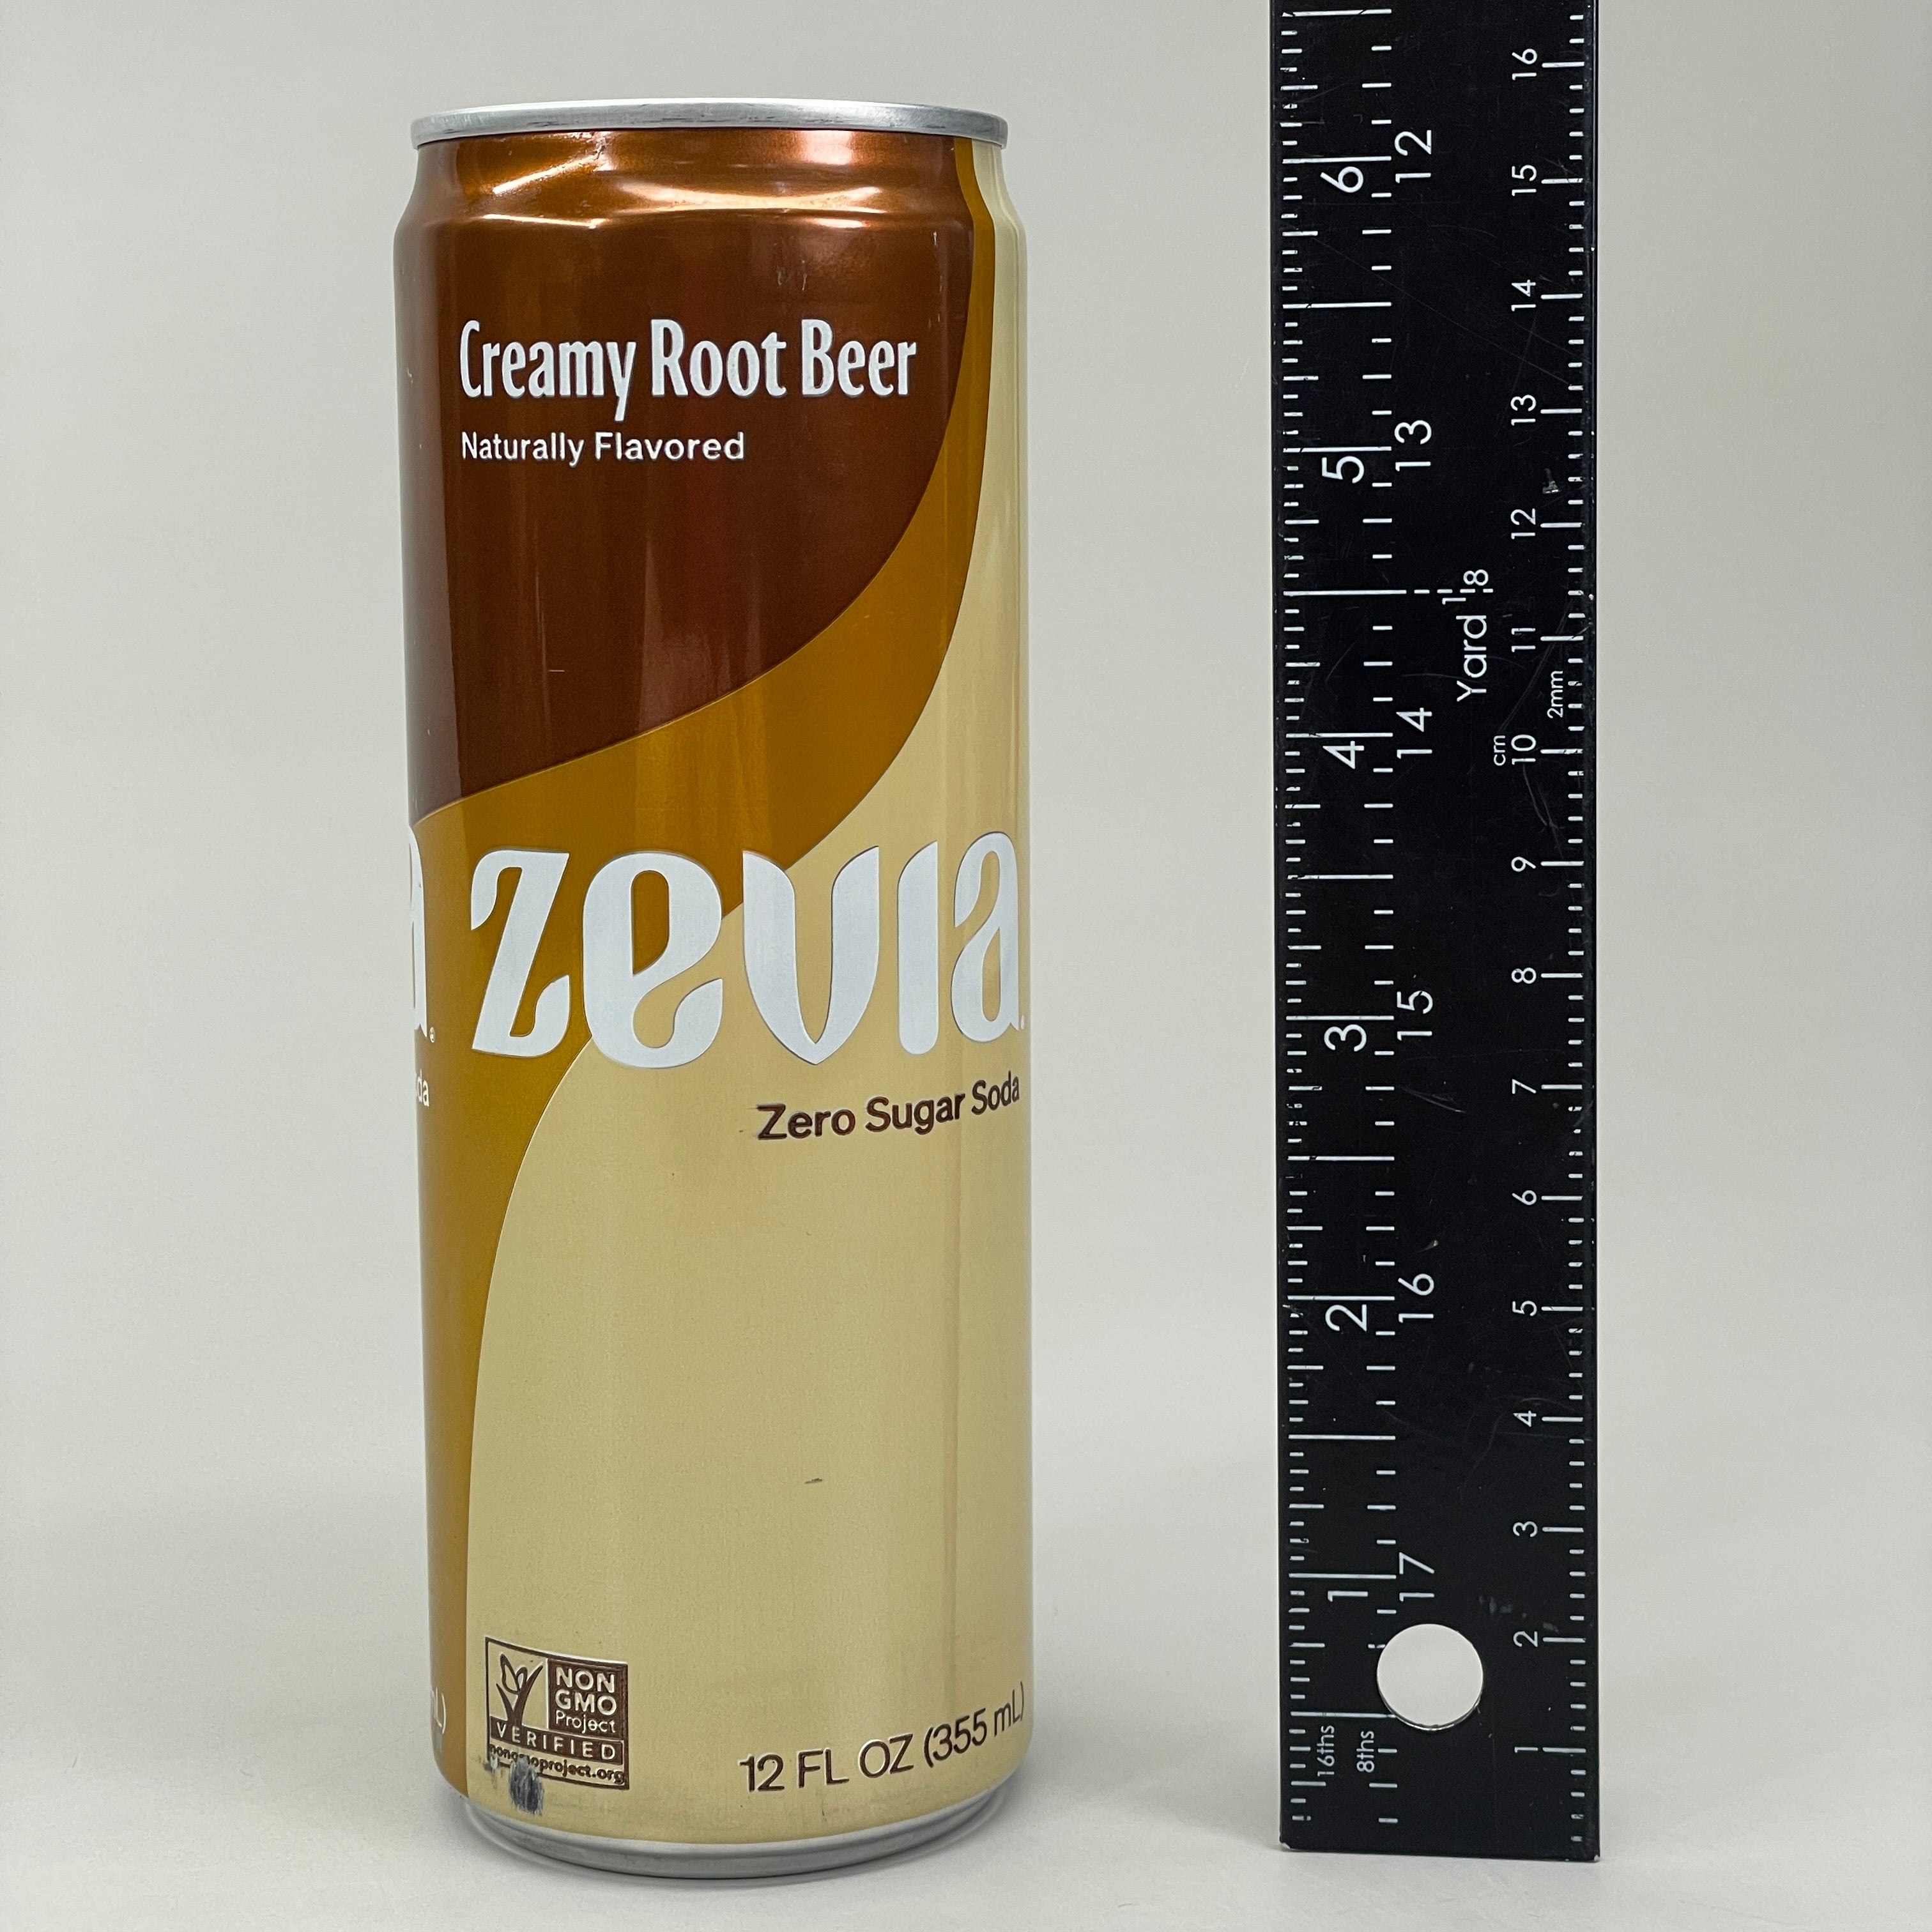 ZA@ ZEVIA 12 PK! Creamy Root Beer Carbonated Beverages 12oz Naturally Flavored (12/24) D